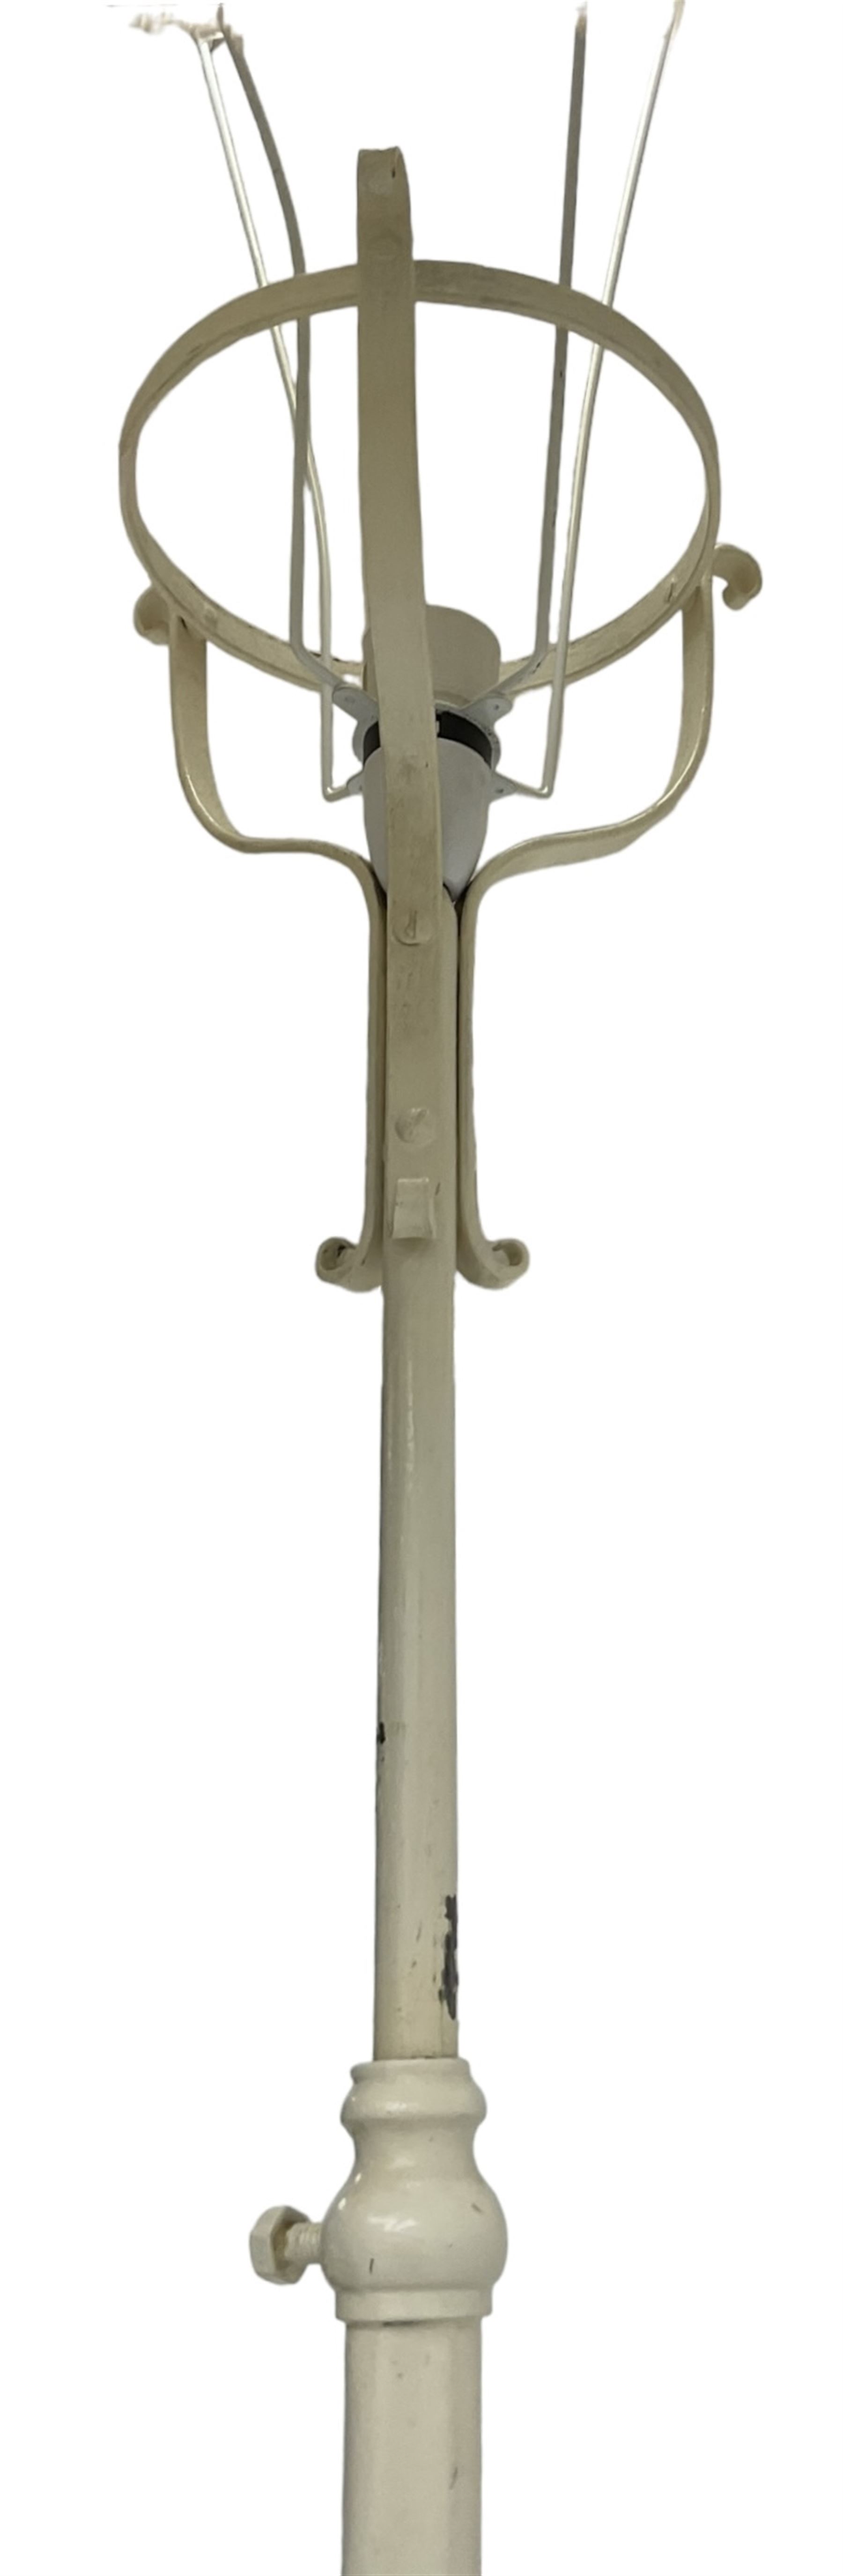 Cream painted wrought iron standard lamp with floral shade - Image 3 of 4